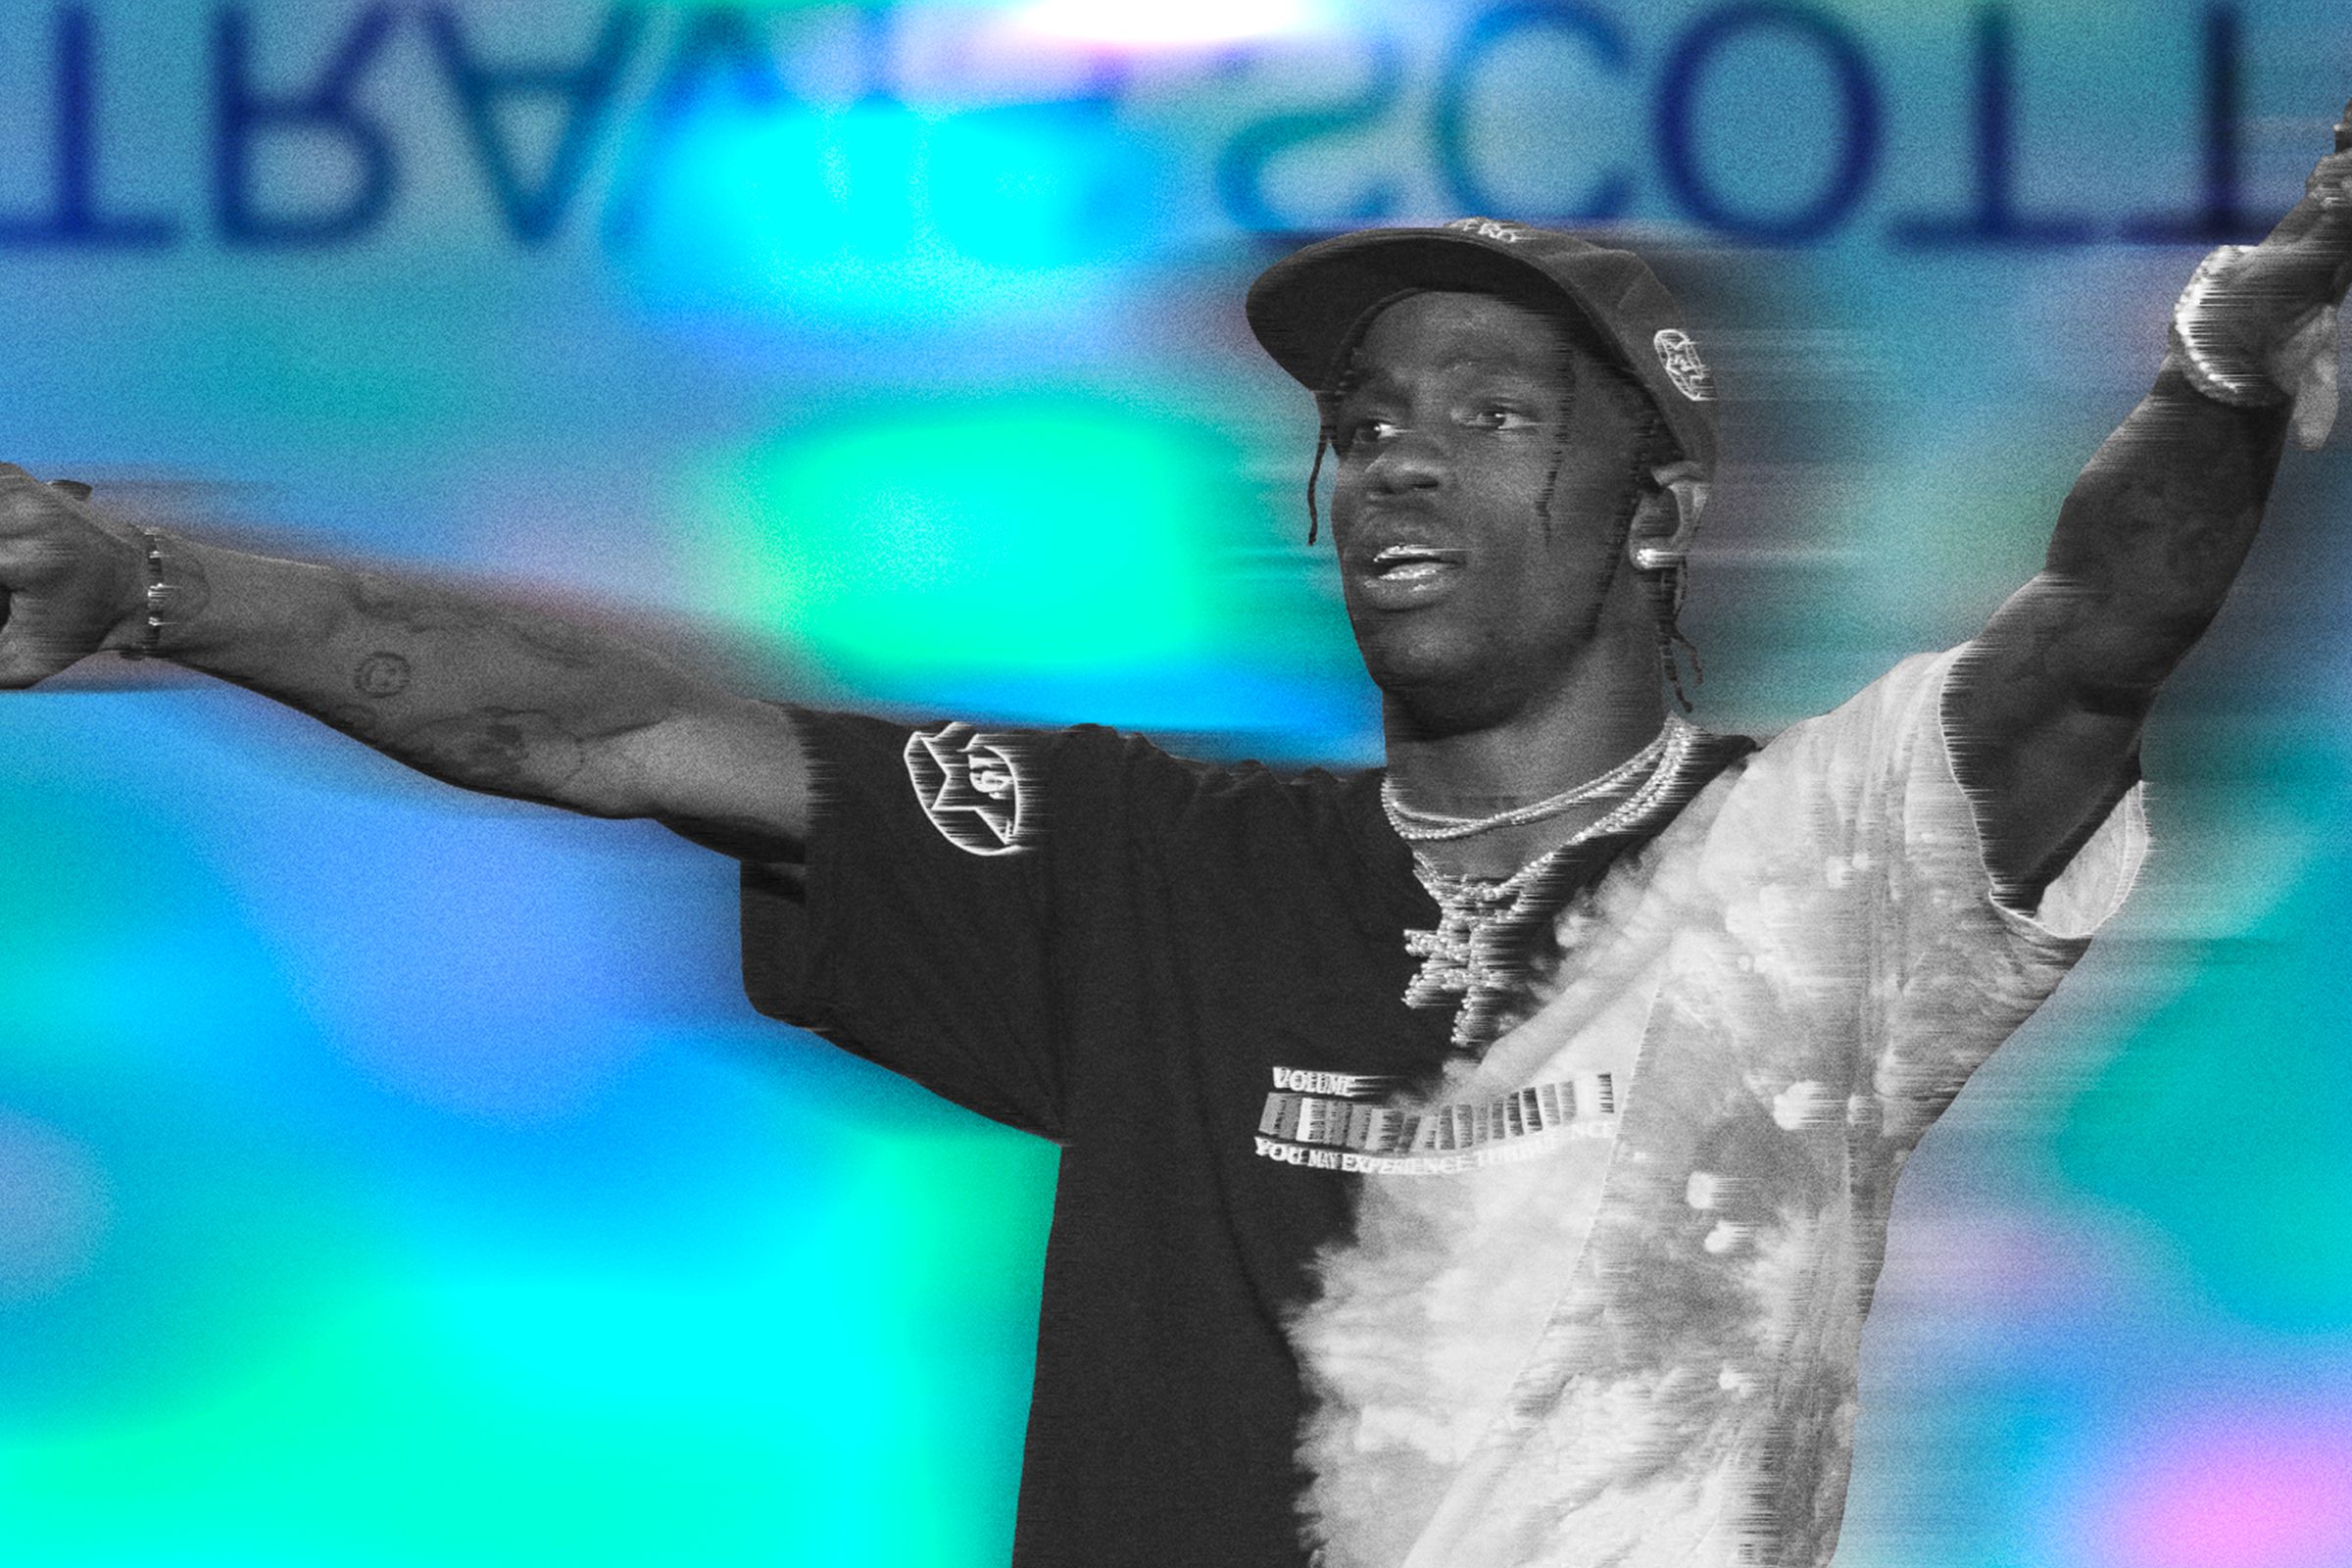 Archival Fashion Is A Recurring Theme In Travis Scott's